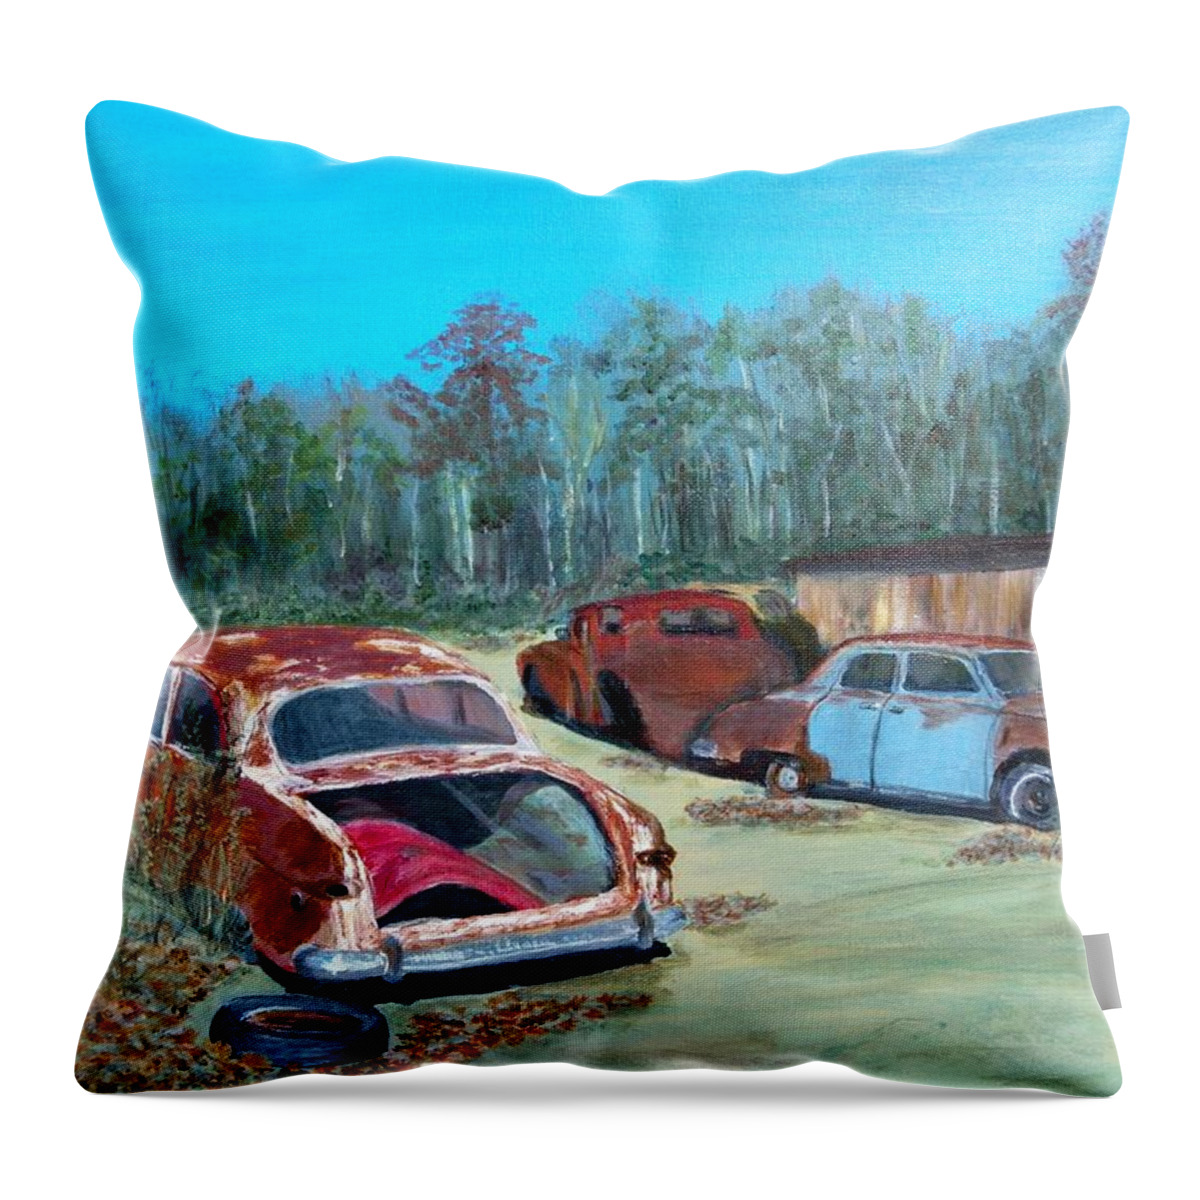 Old Cars Throw Pillow featuring the painting Passions Past Tense by Peggy King